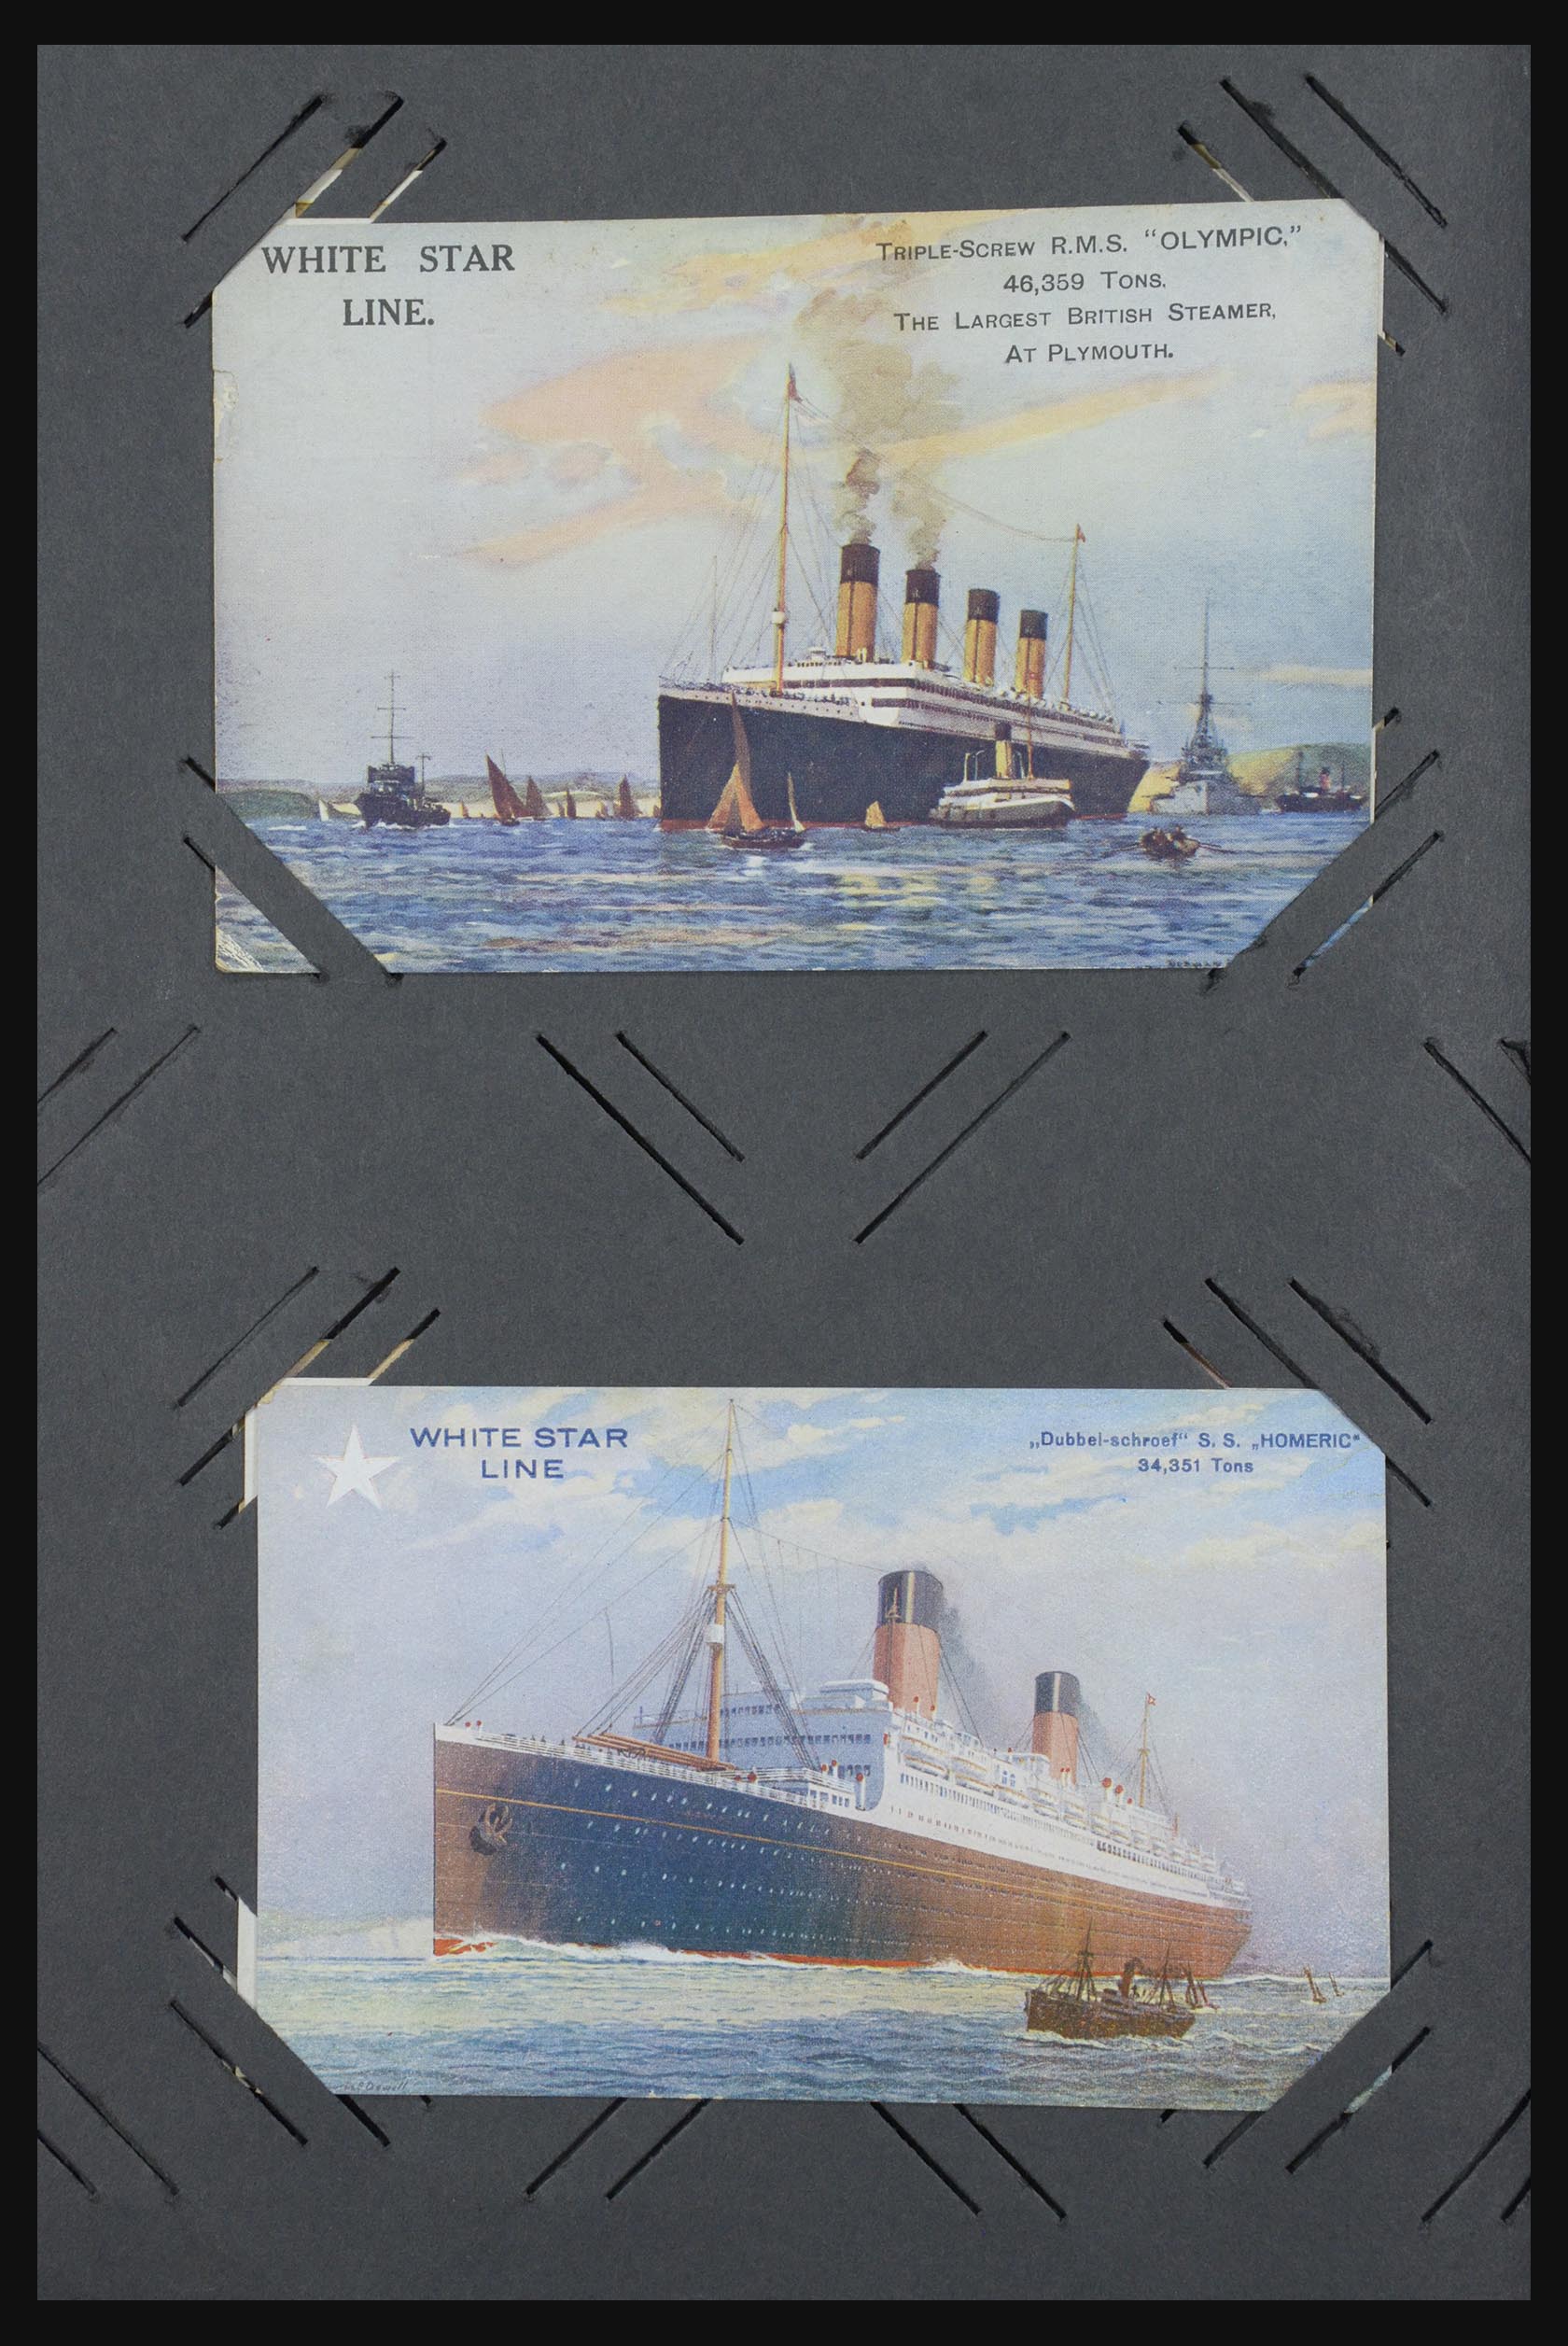 31721 020 - 31721 Thematic: Ships picture postcards 1910-1940.